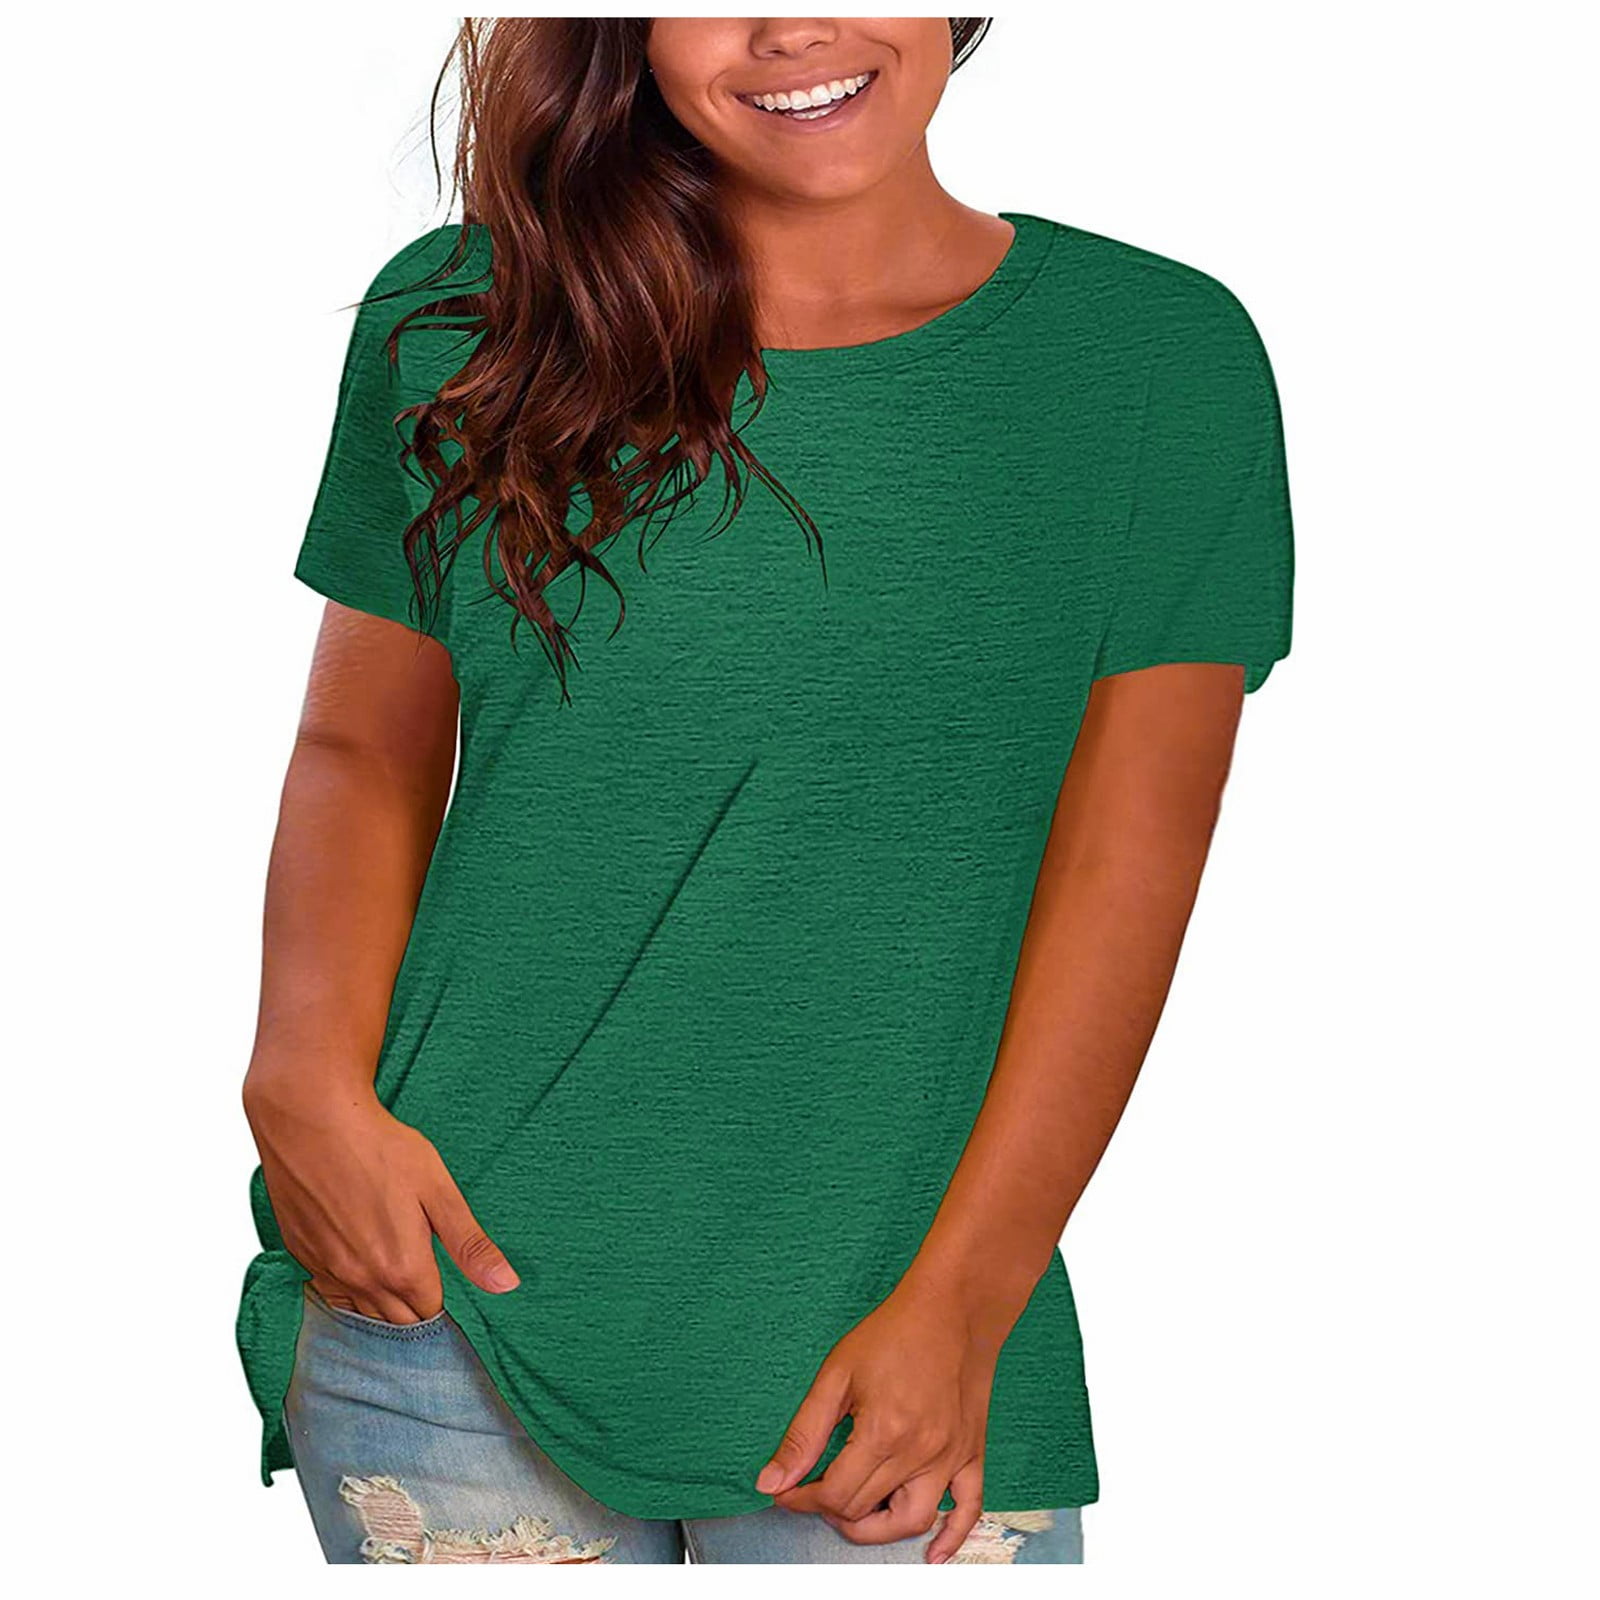 CTEEGC Plus Size T Shirts for Women Solid Color O-Neck Tee